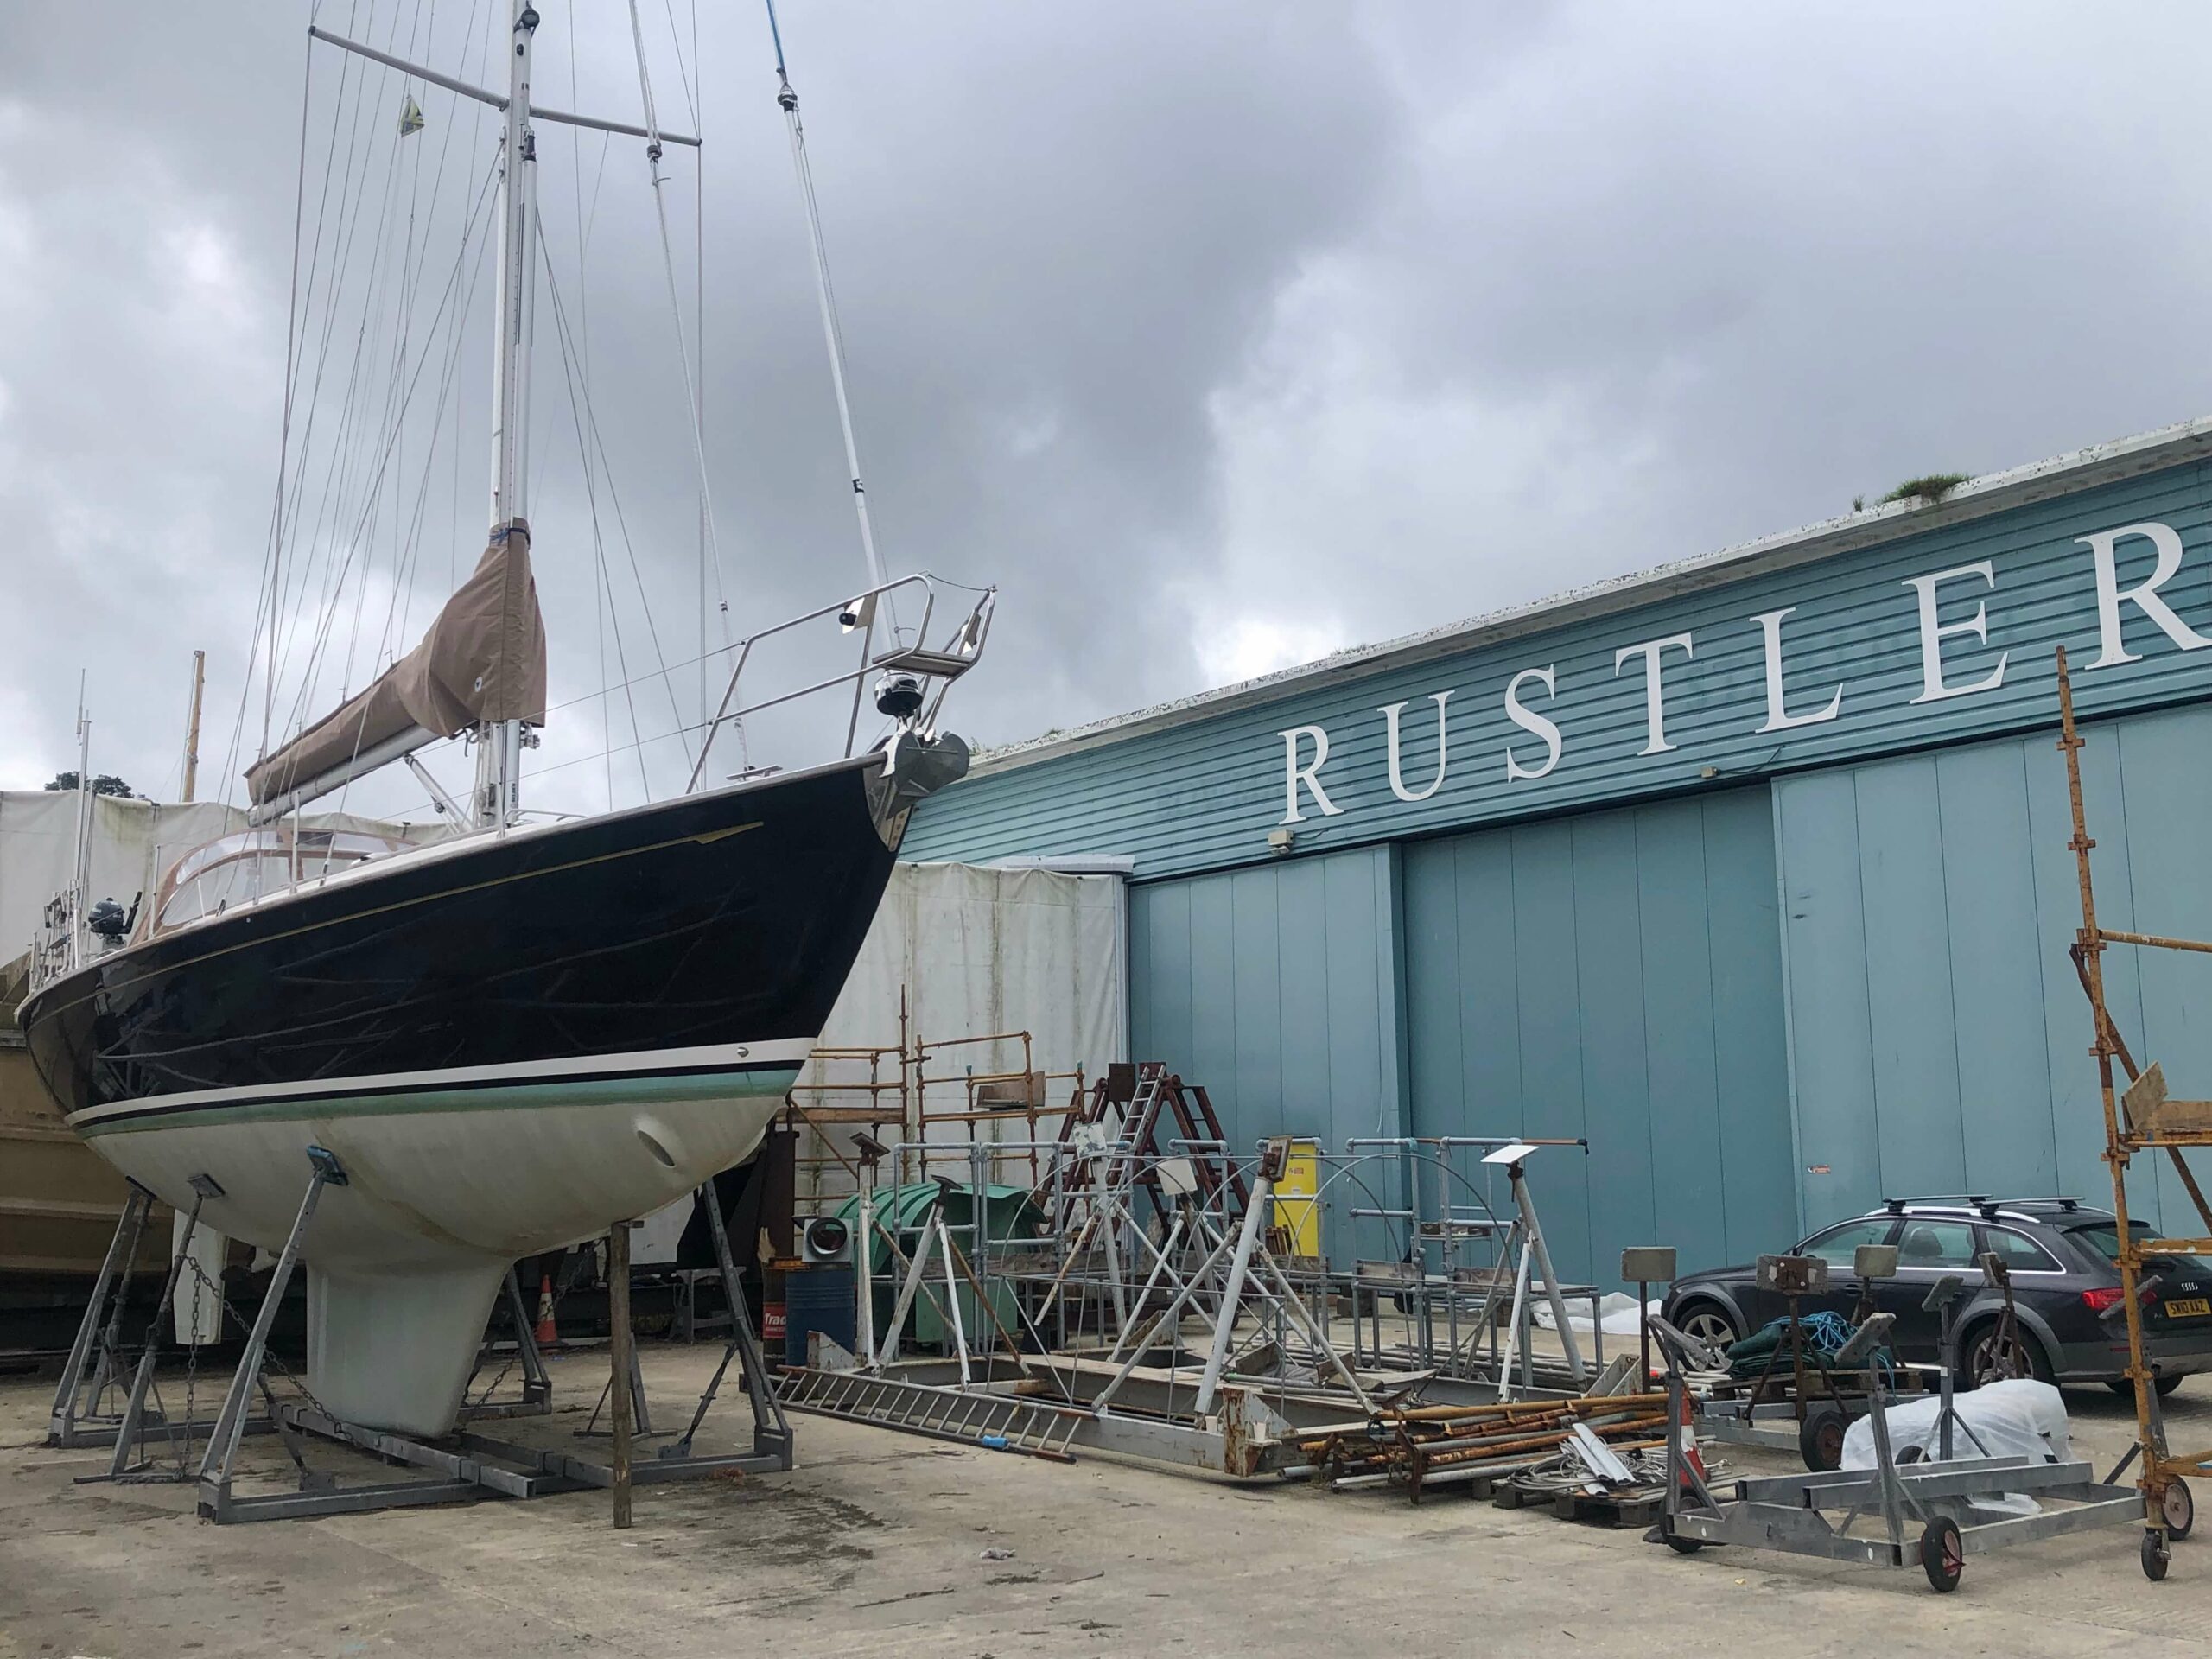 Rustler Yachts yard in Falmouth with a Rustler 42 sitting in a cradle outside